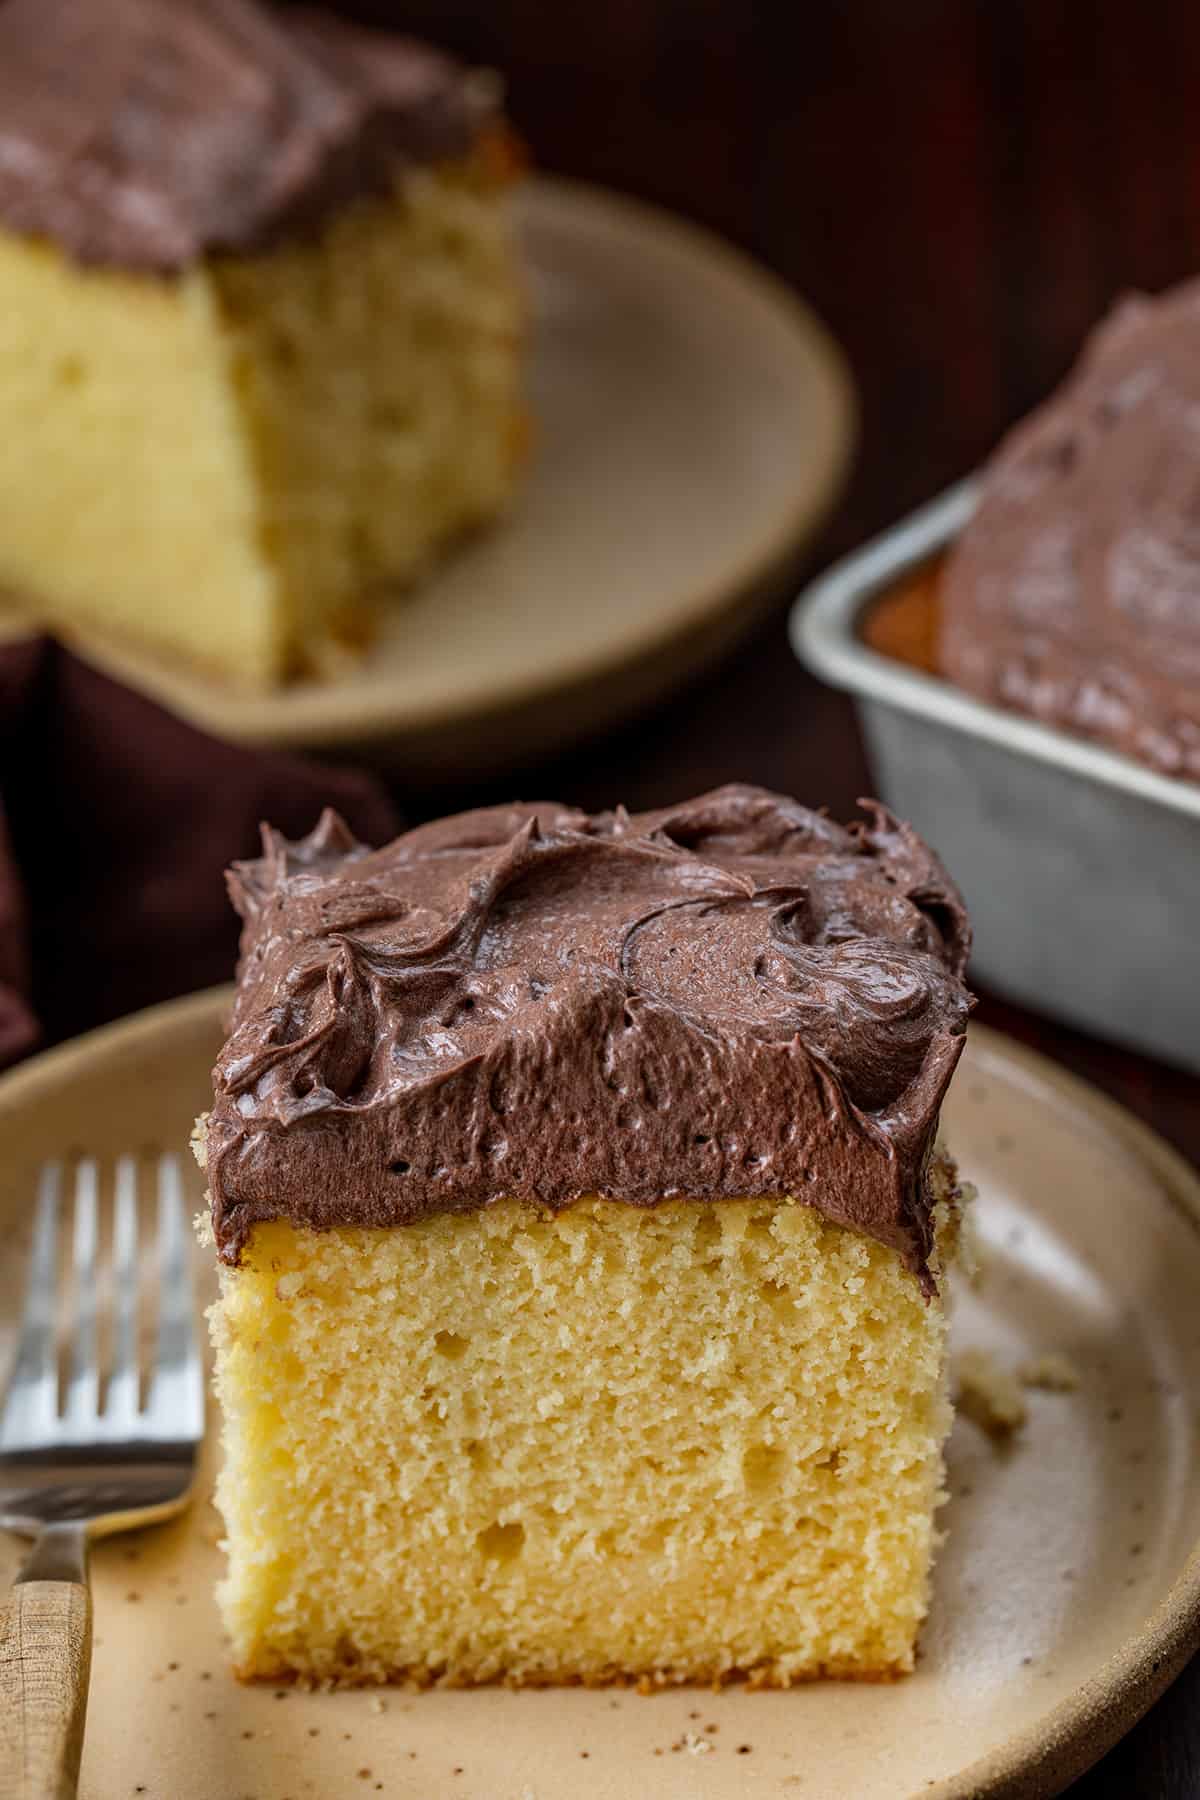 Pieces of Yellow Cake with Chocolate Ermine Frosting on Them.